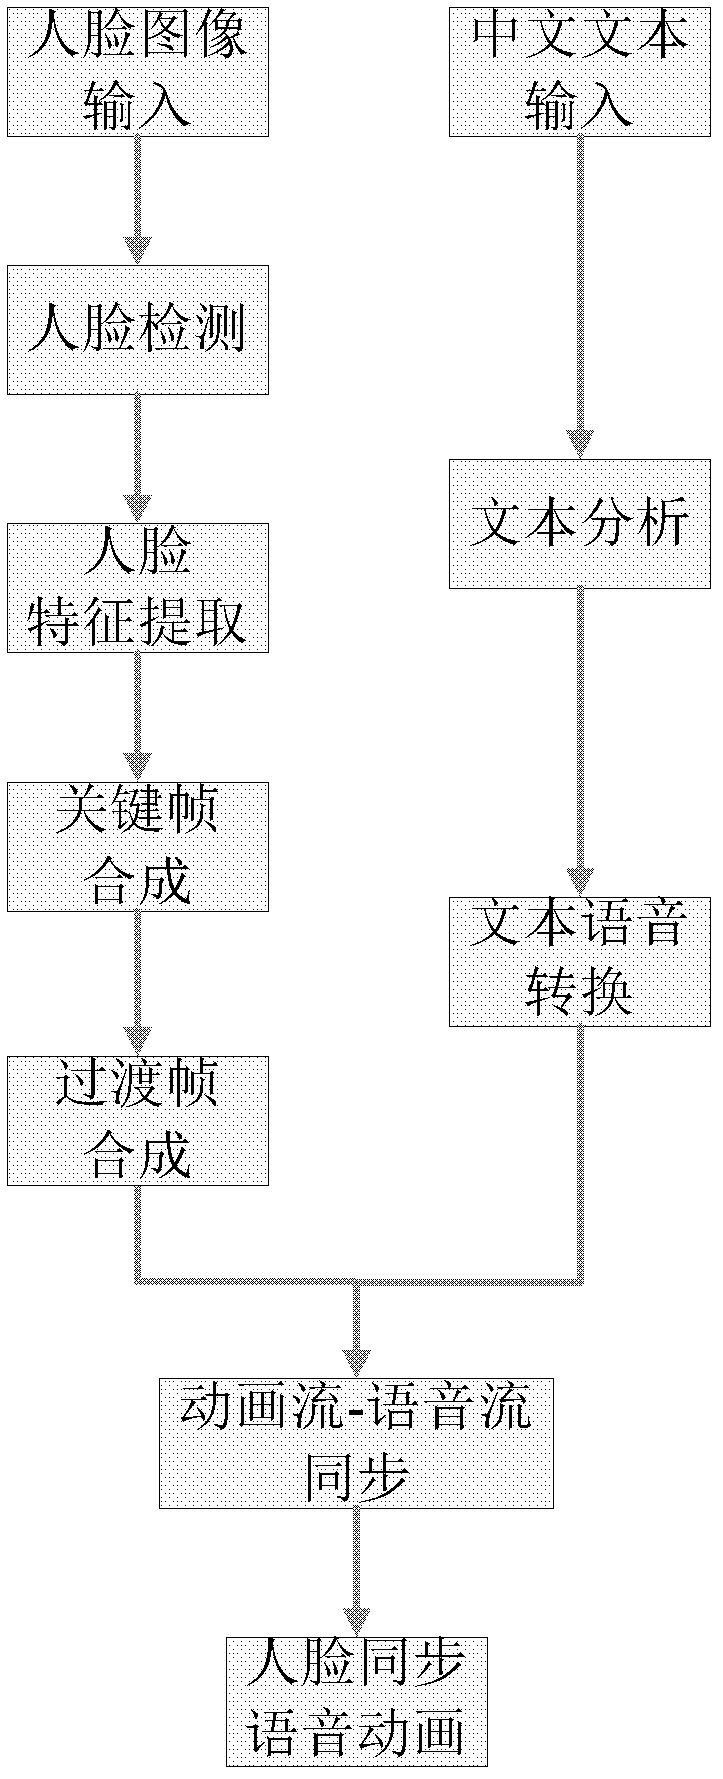 Method for processing face and speech synchronous animation based on Chinese text drive